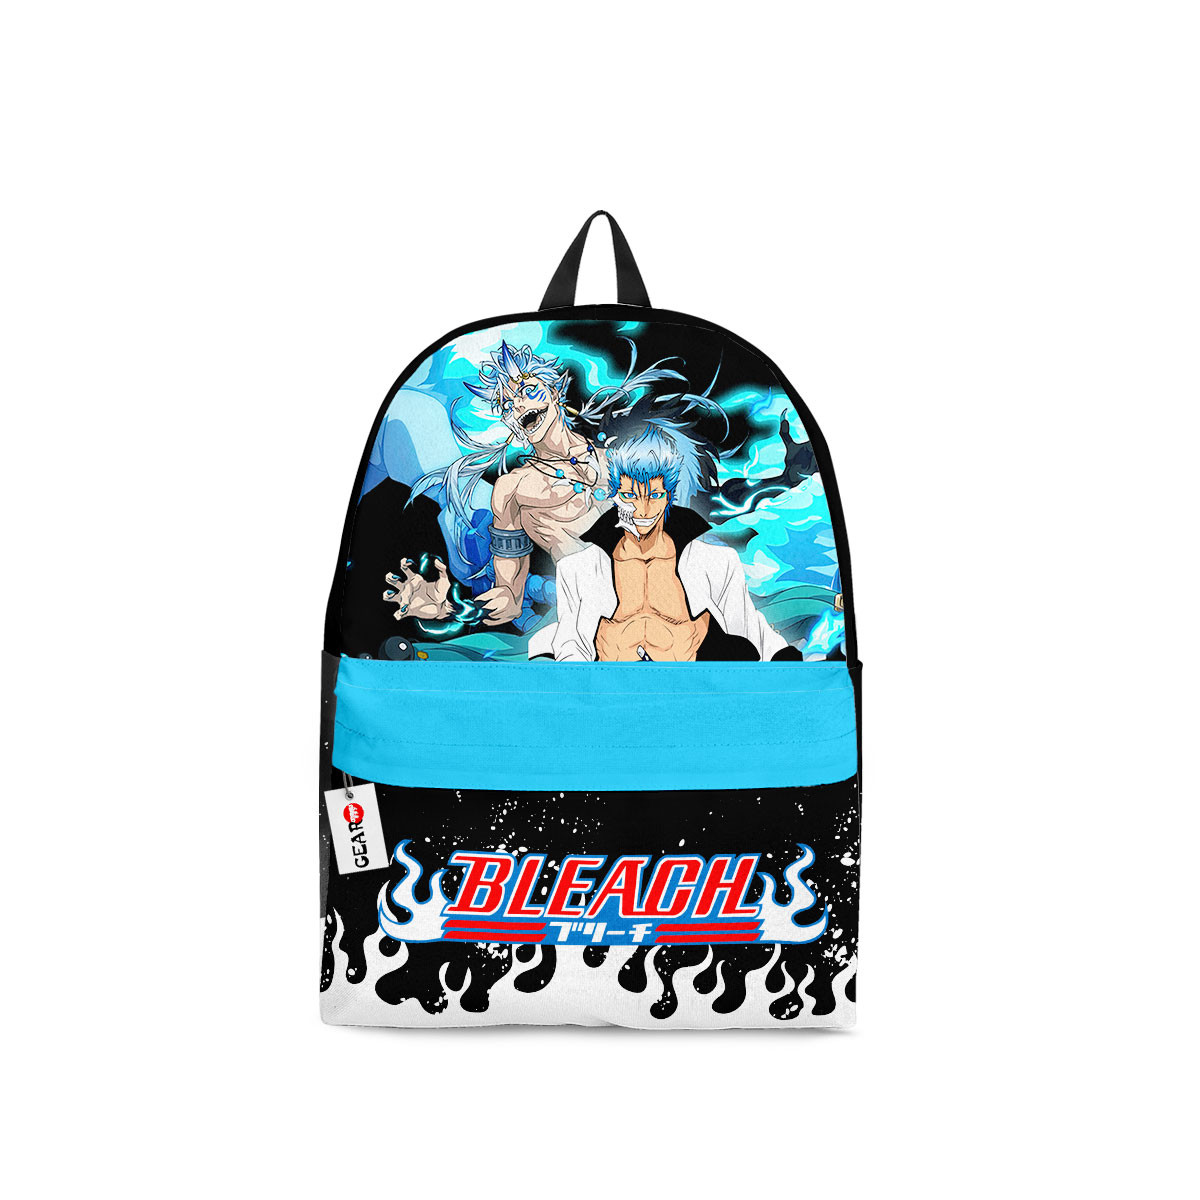 If you are an Anime Lover, here are items that may interest you 233